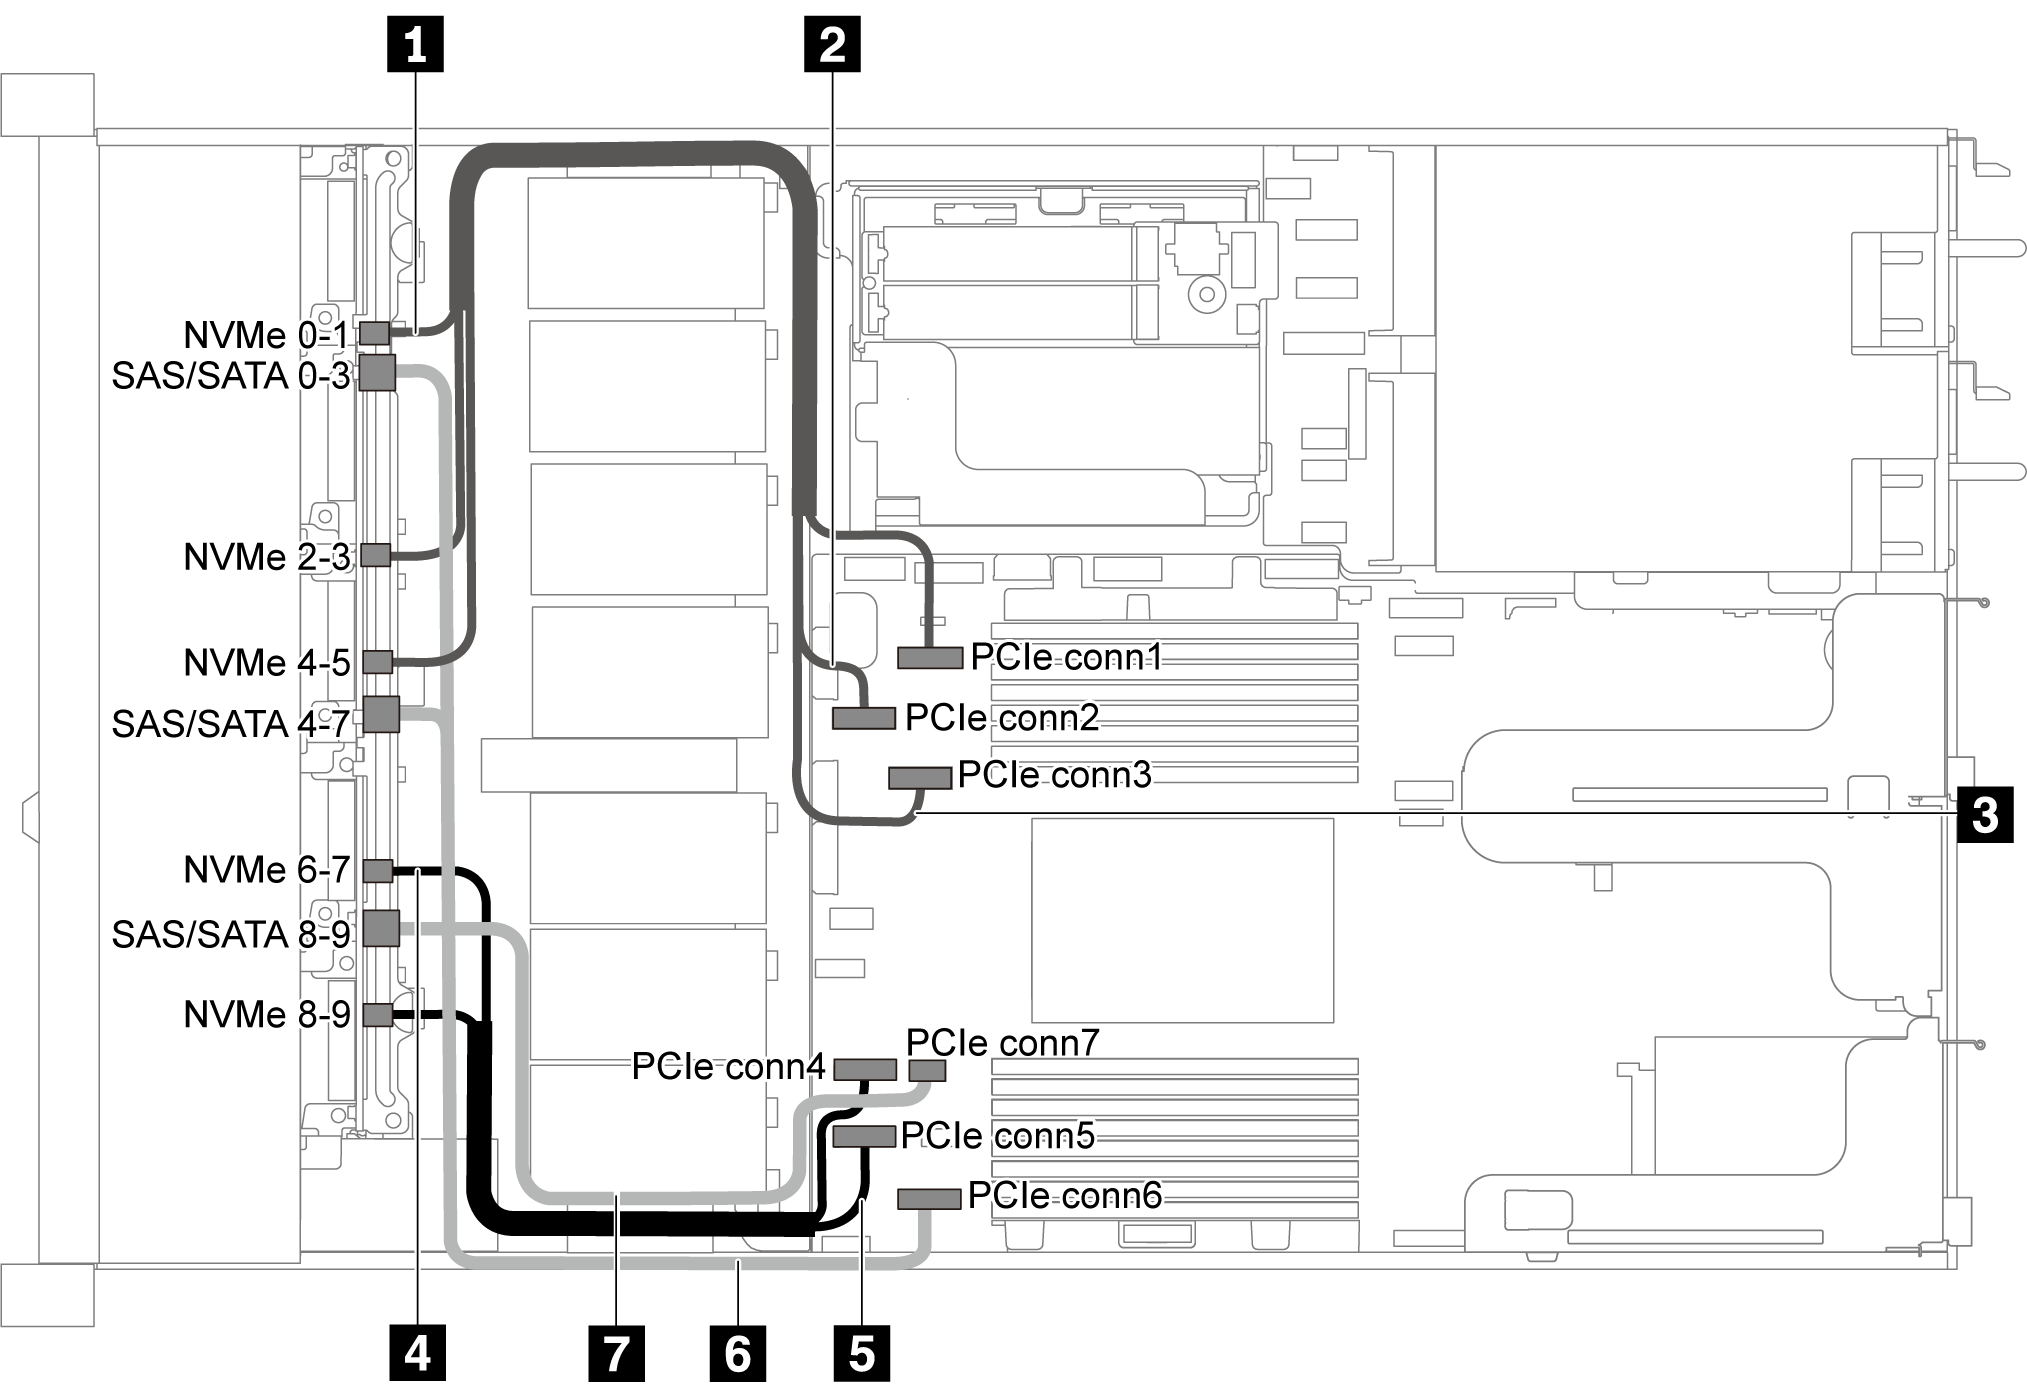 Cable routing for server model with ten 2.5-inch SATA/NVMe drives